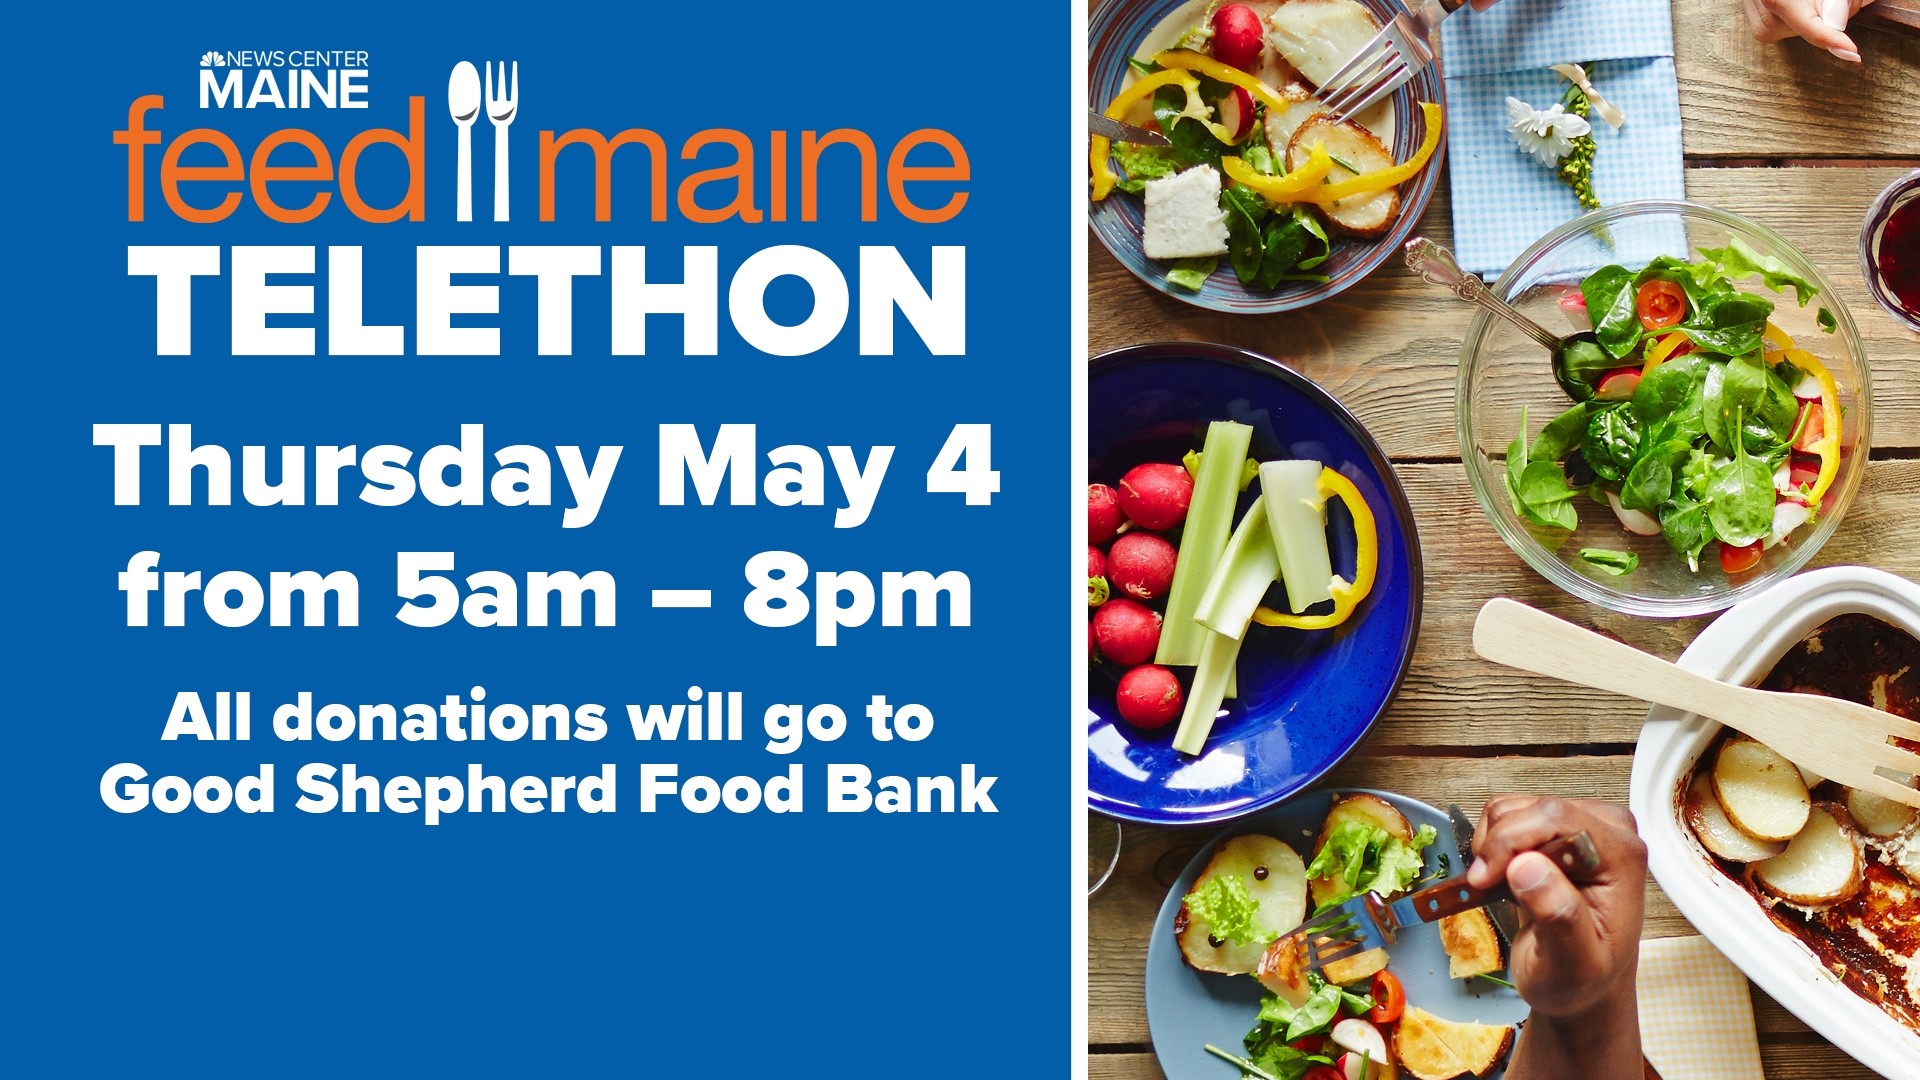 The telethon is on May 4 from 5 a.m. to 8 p.m. All donations go to the Good Shepherd Food Bank to help feed Mainers in need.